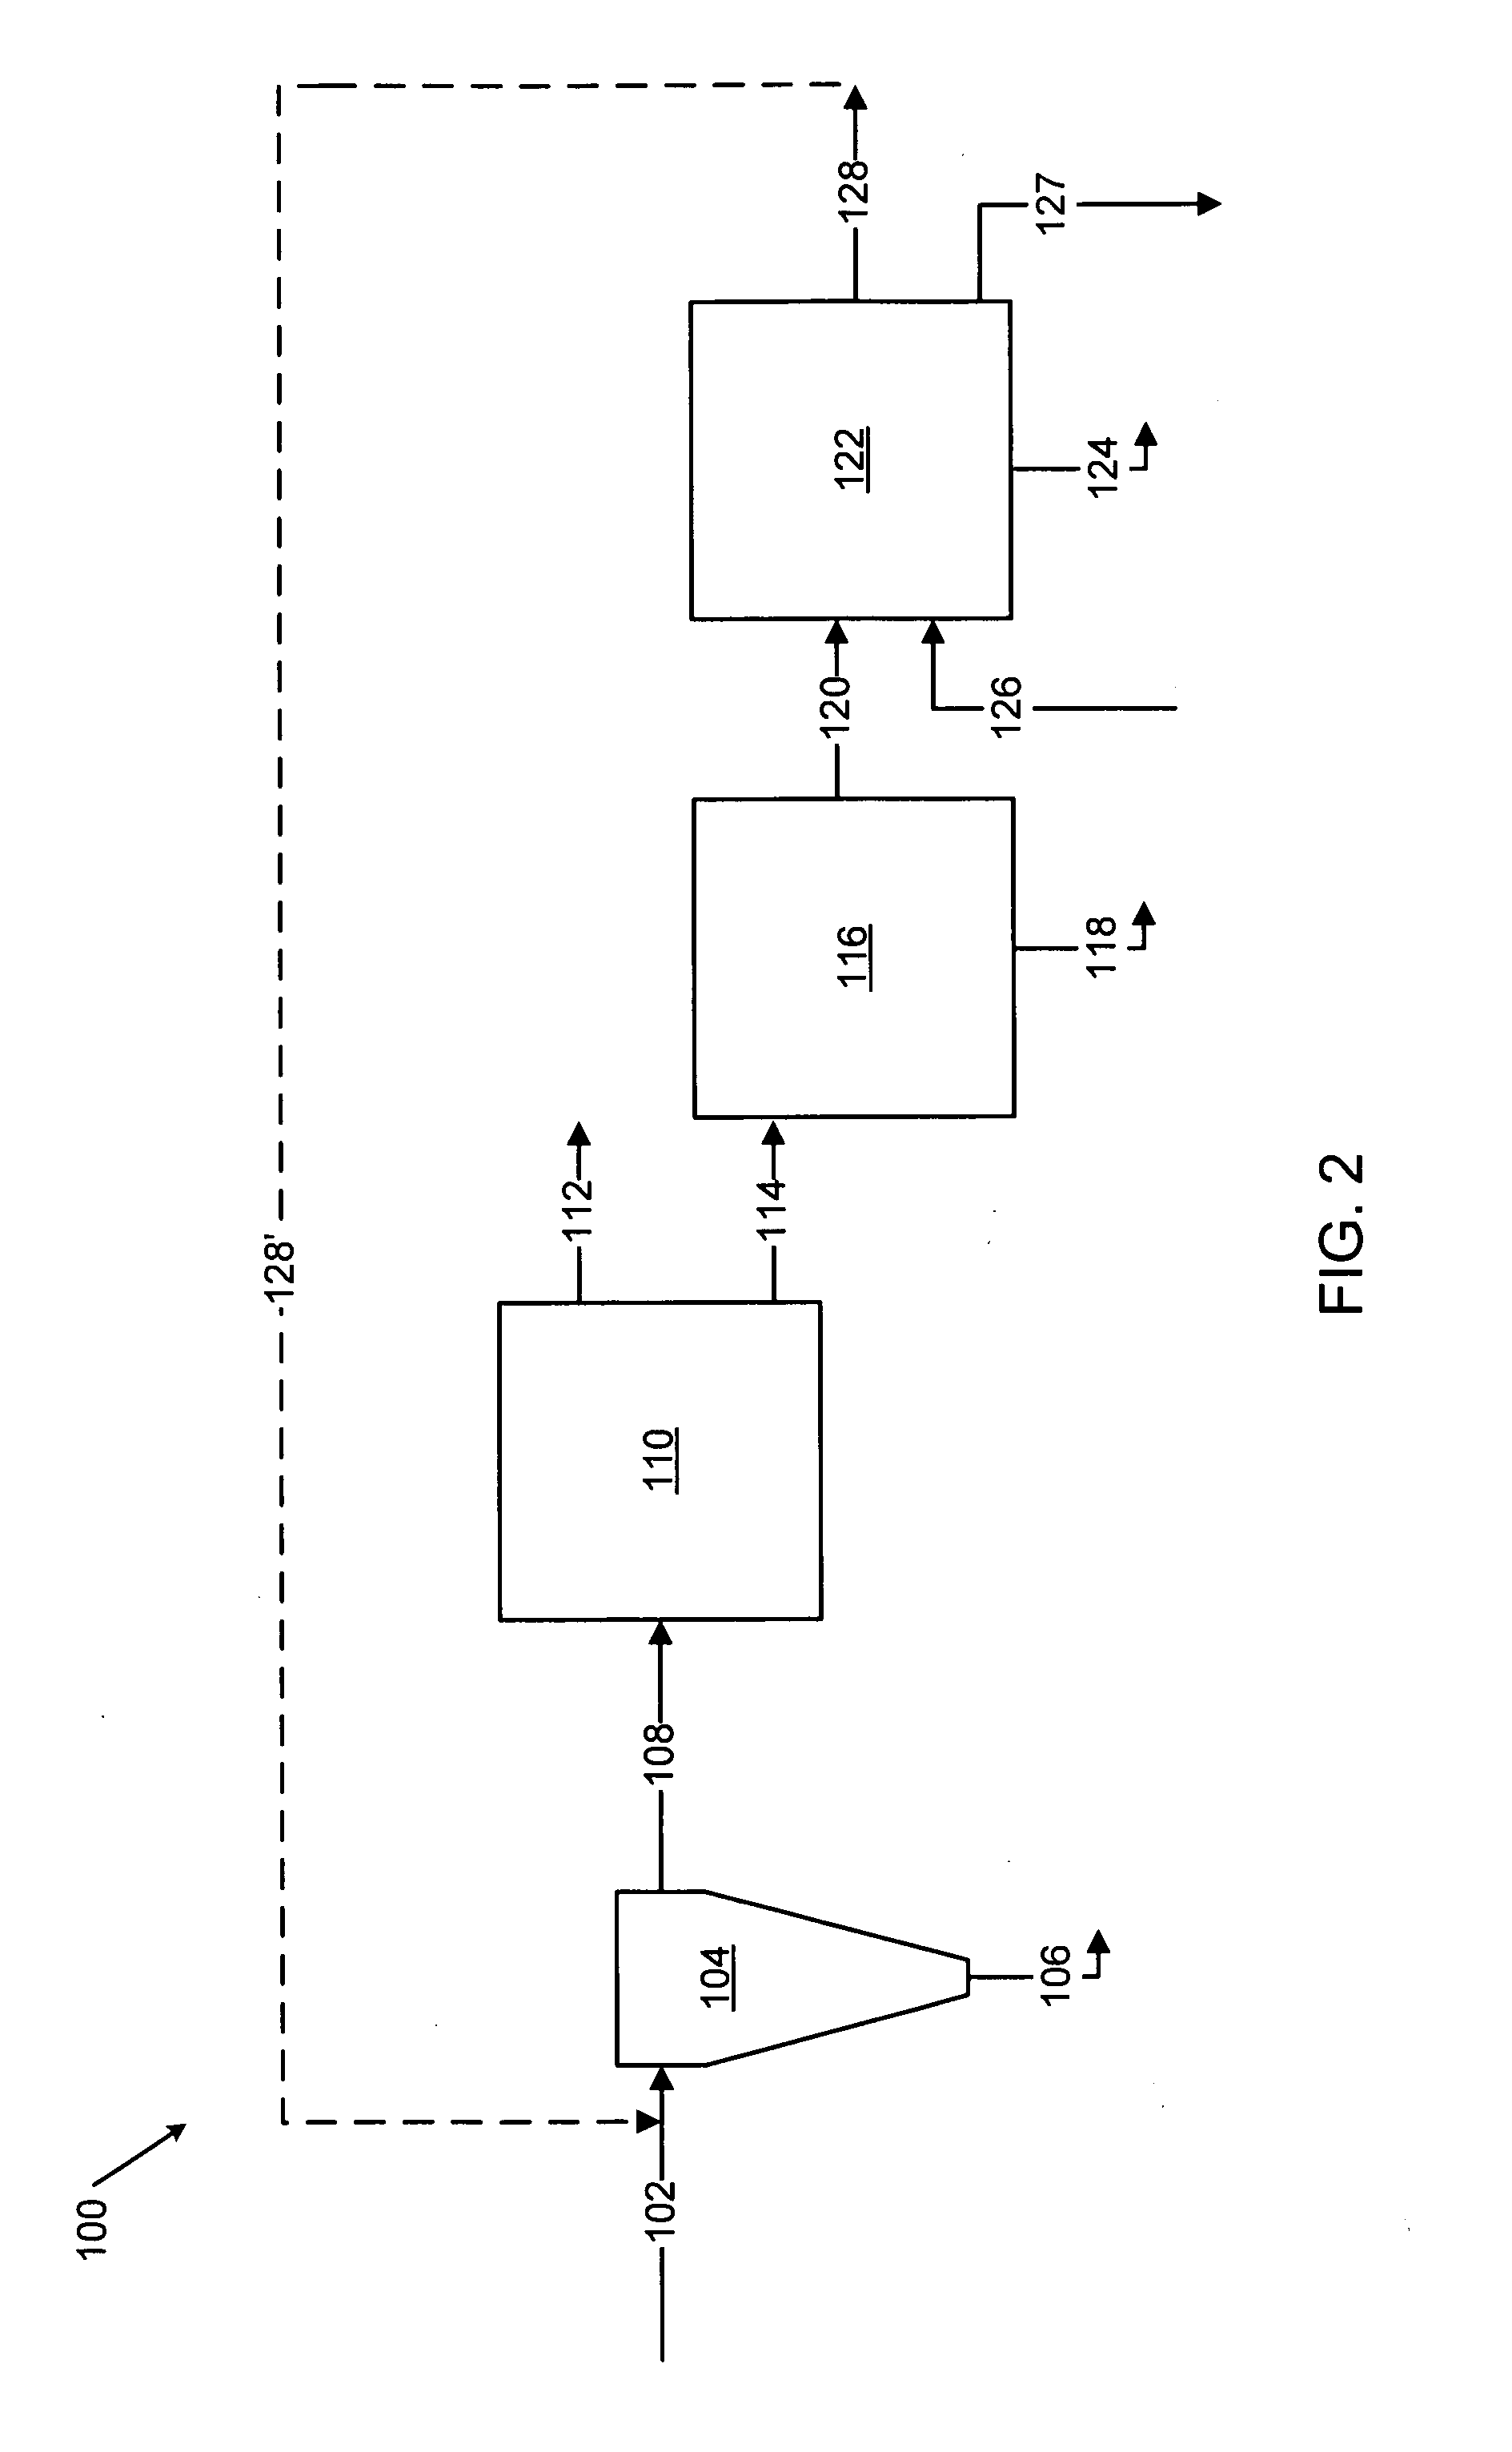 Methods for treating an offgas containing carbon oxides